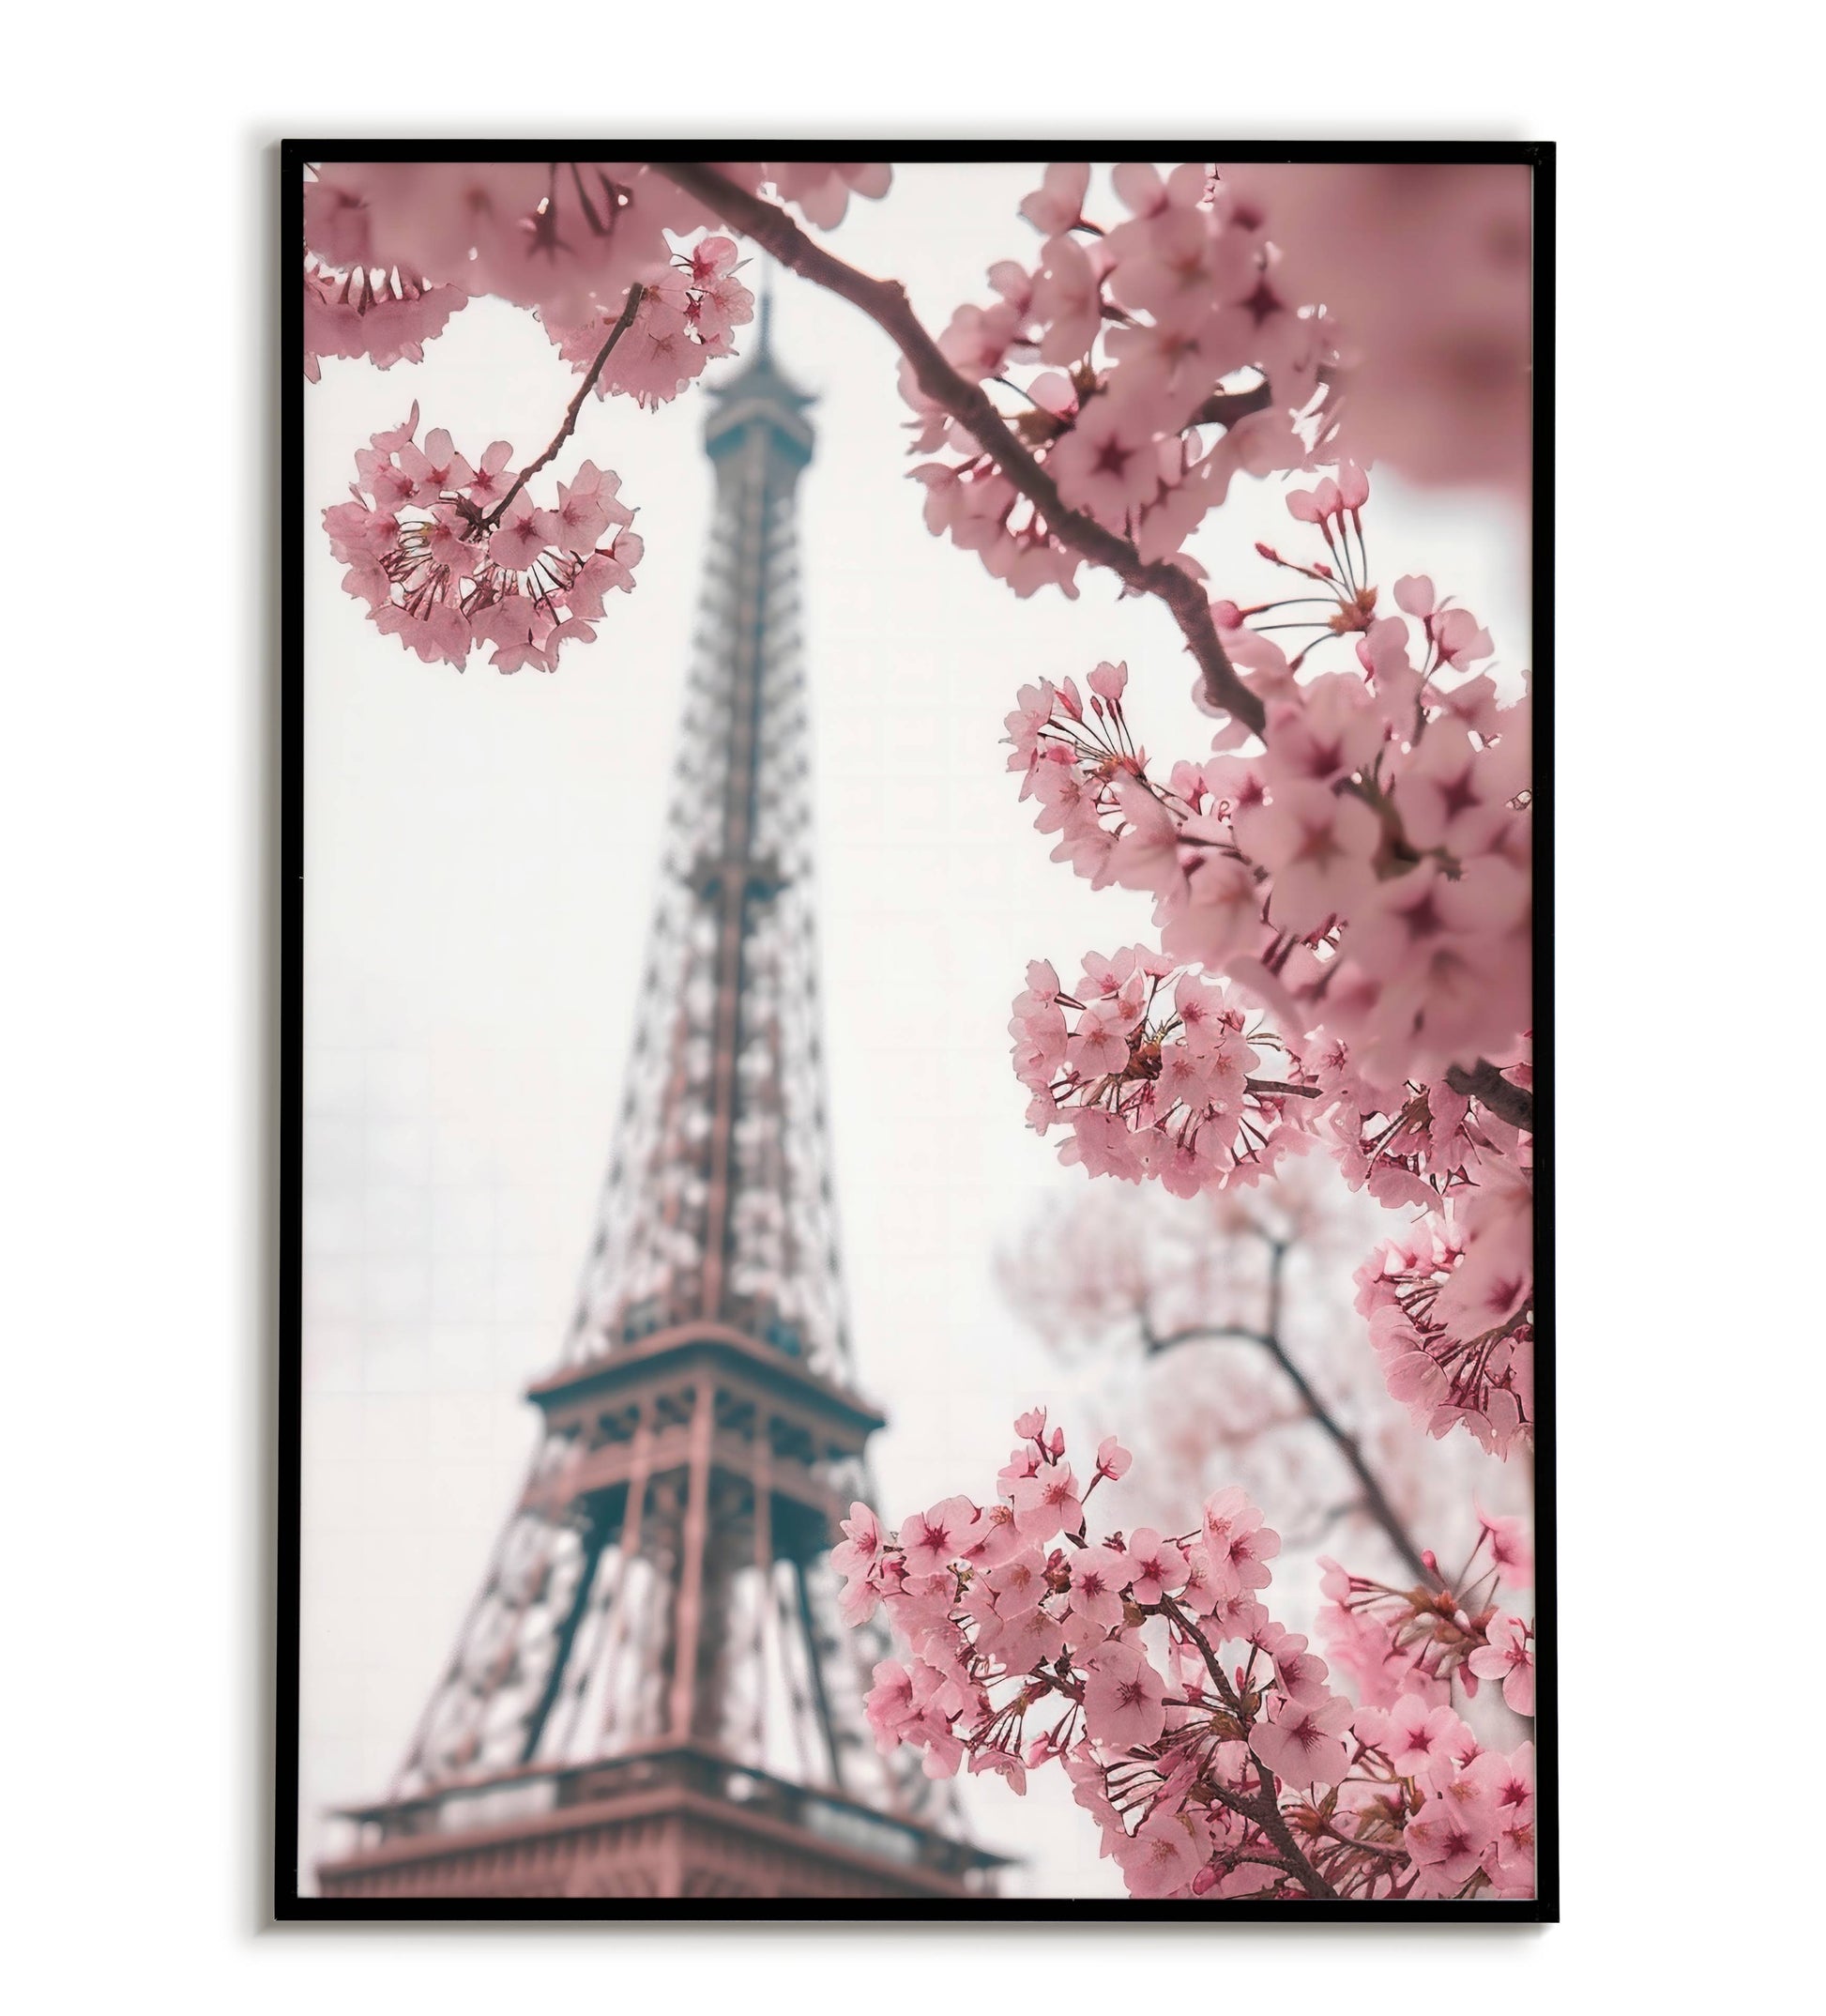 Paris Under Cherry Blossoms printable wall art poster. Romantic and picturesque artwork.